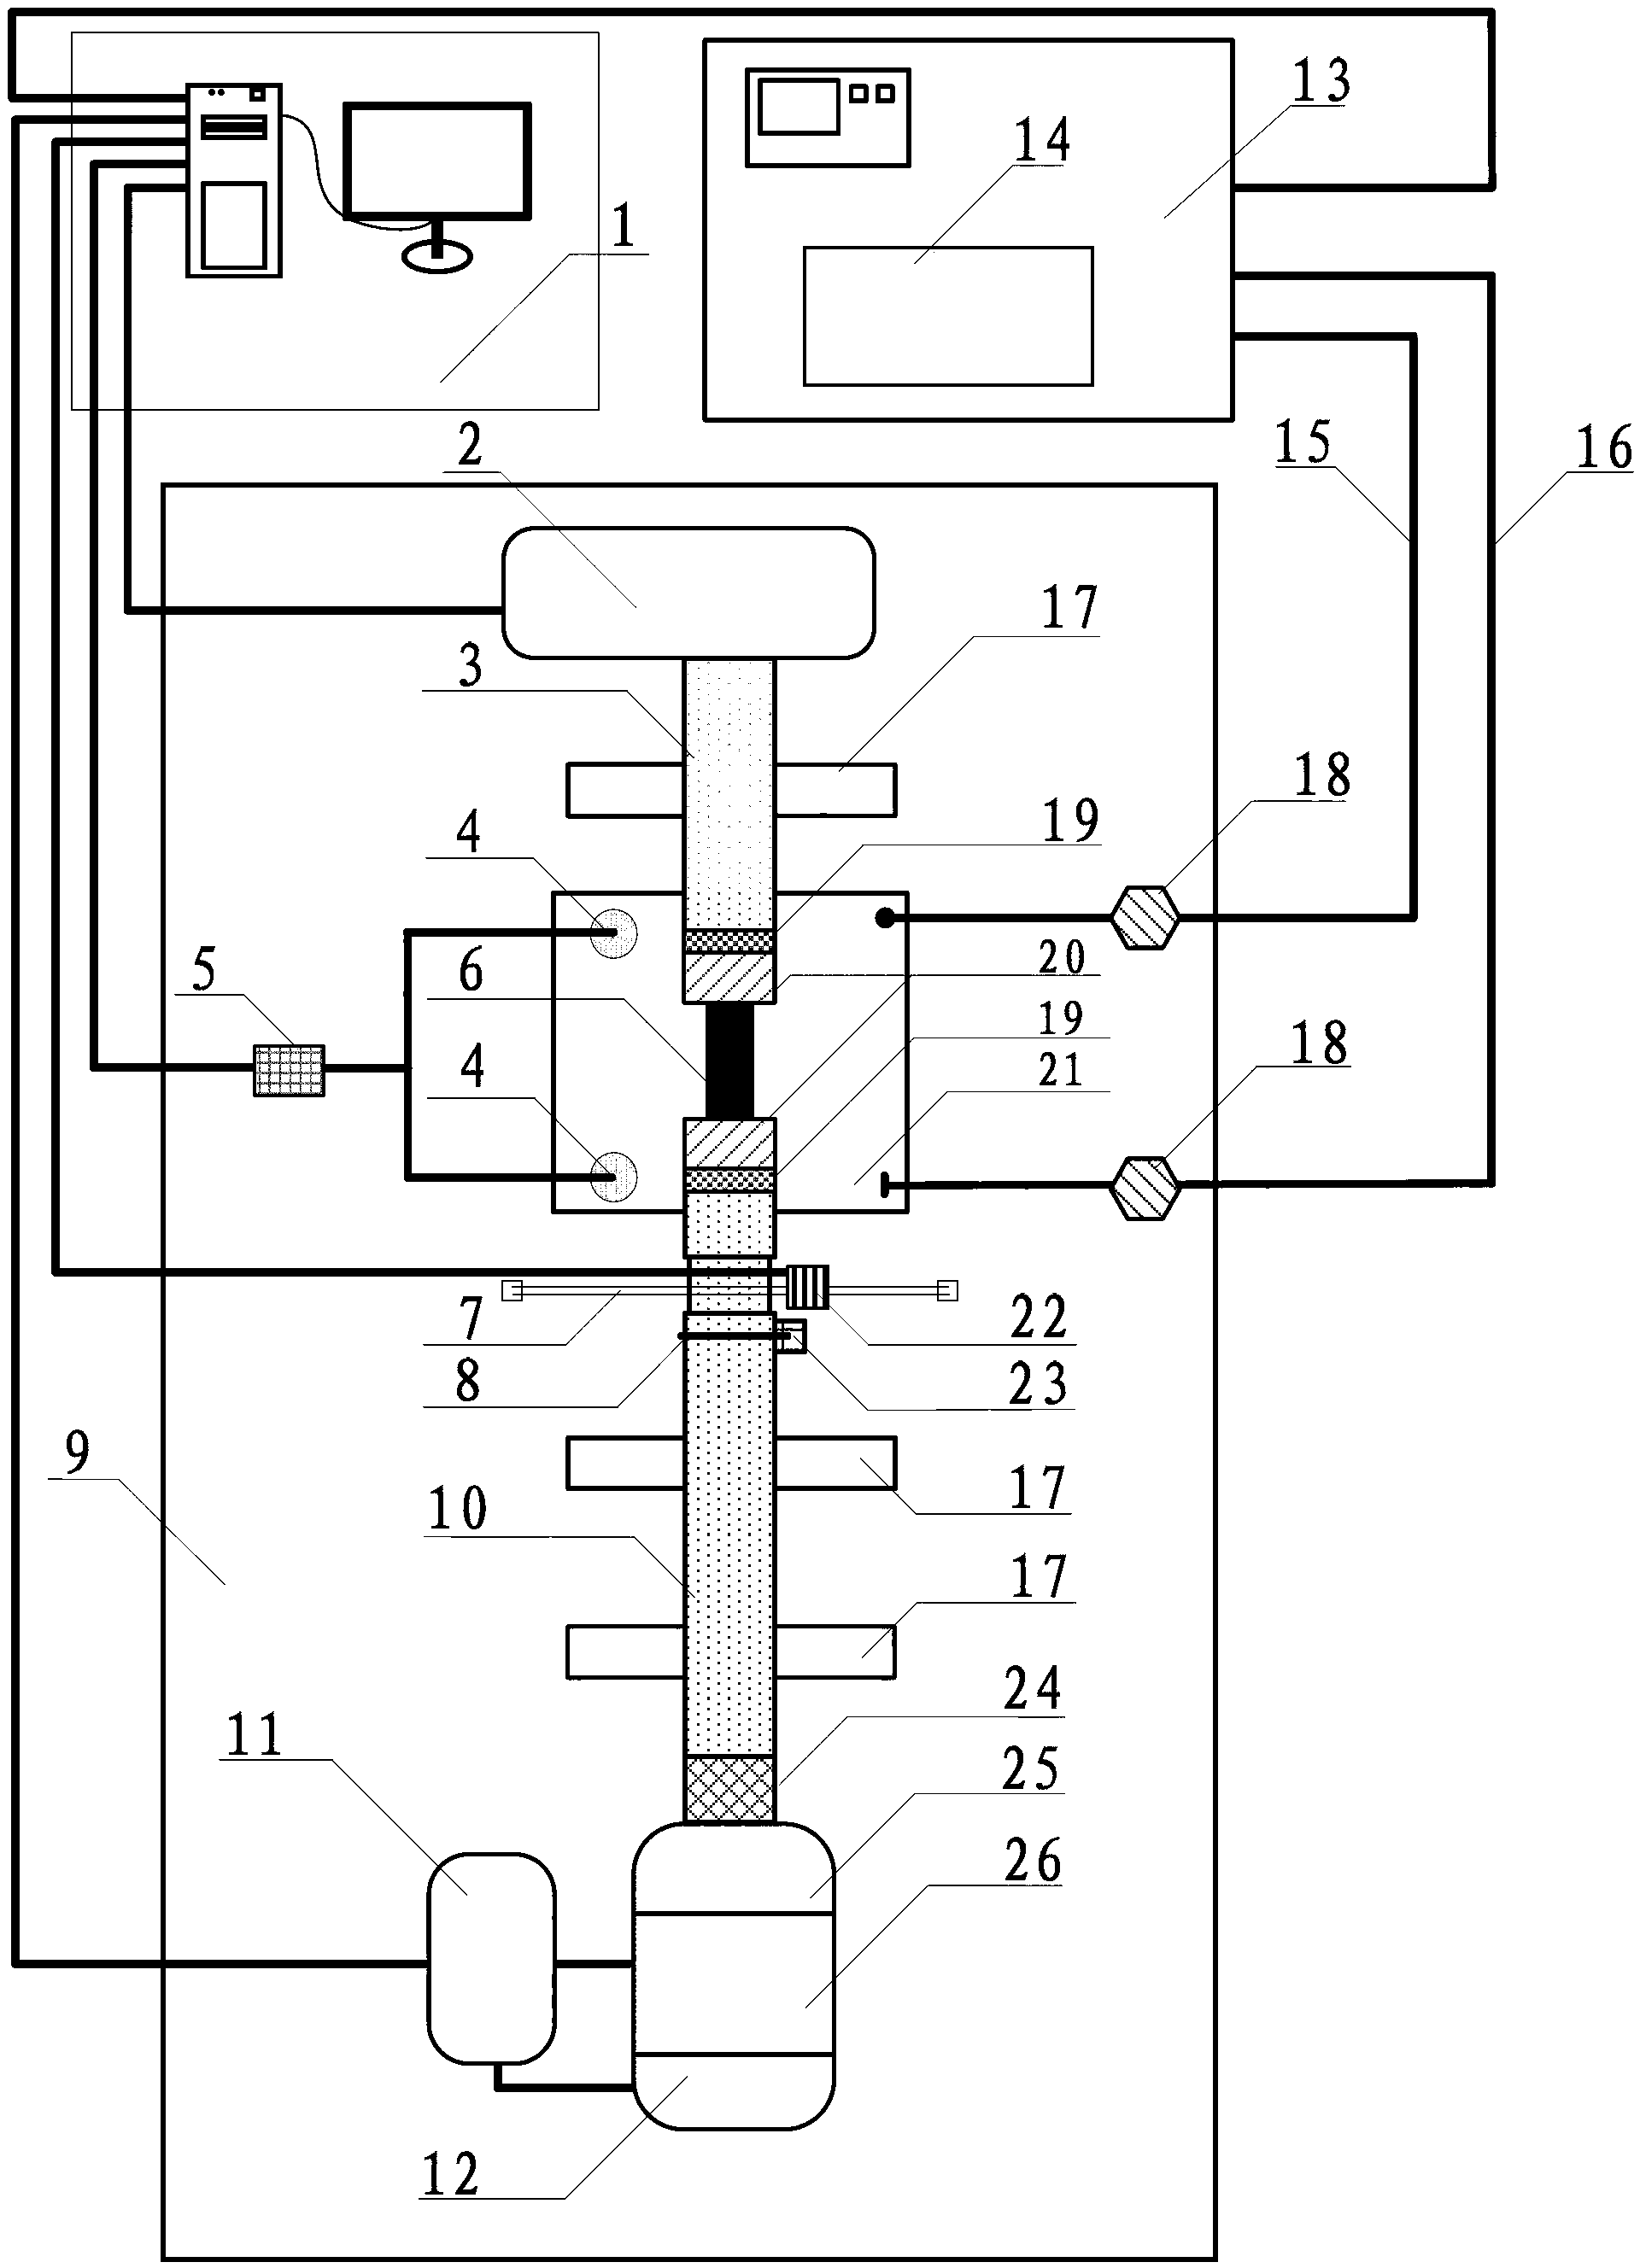 Rotation shear stress relaxation test device for asphalt mixture and method